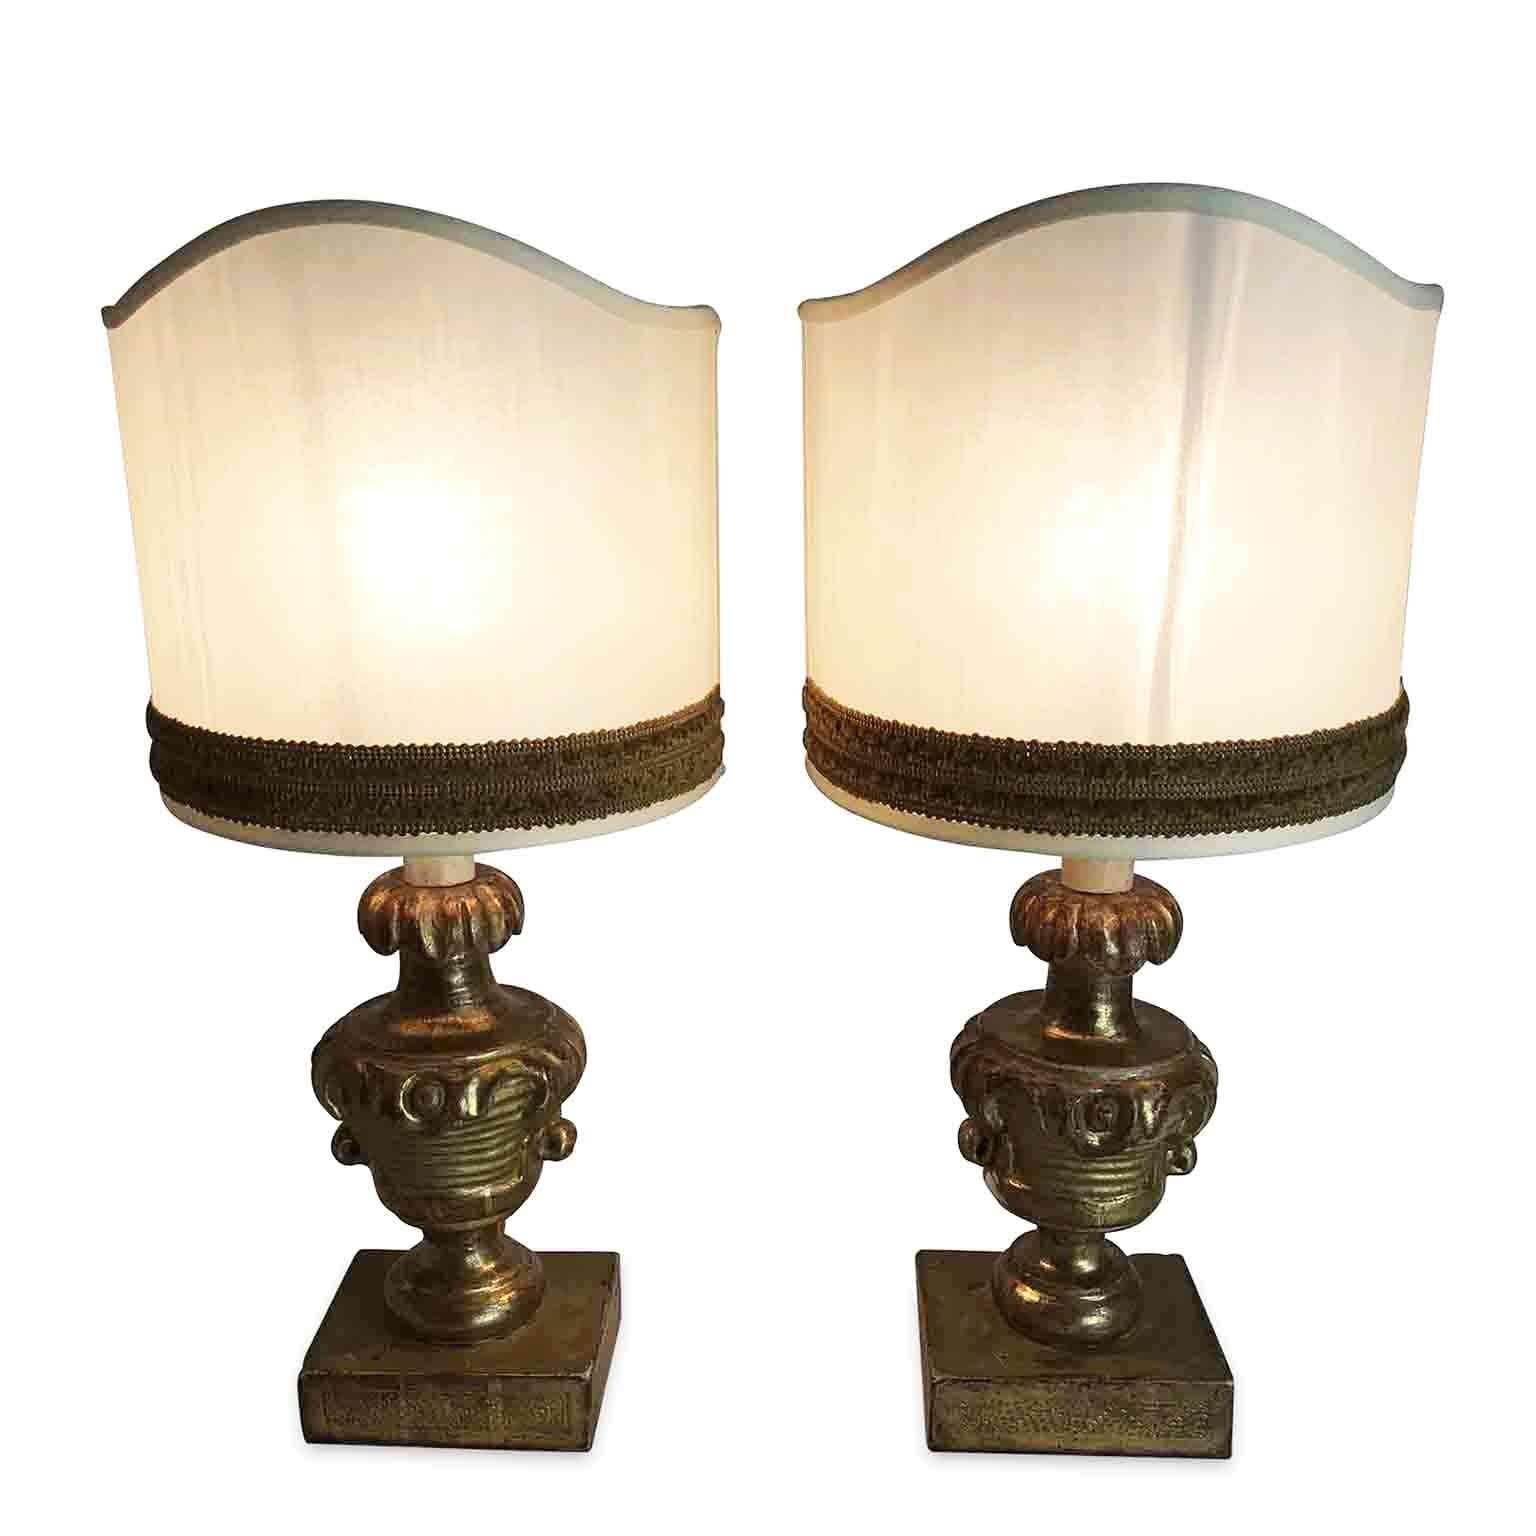 Wood Pair of Italian Antique Table Lamps 18th Century Carved Giltwood Circular Vases